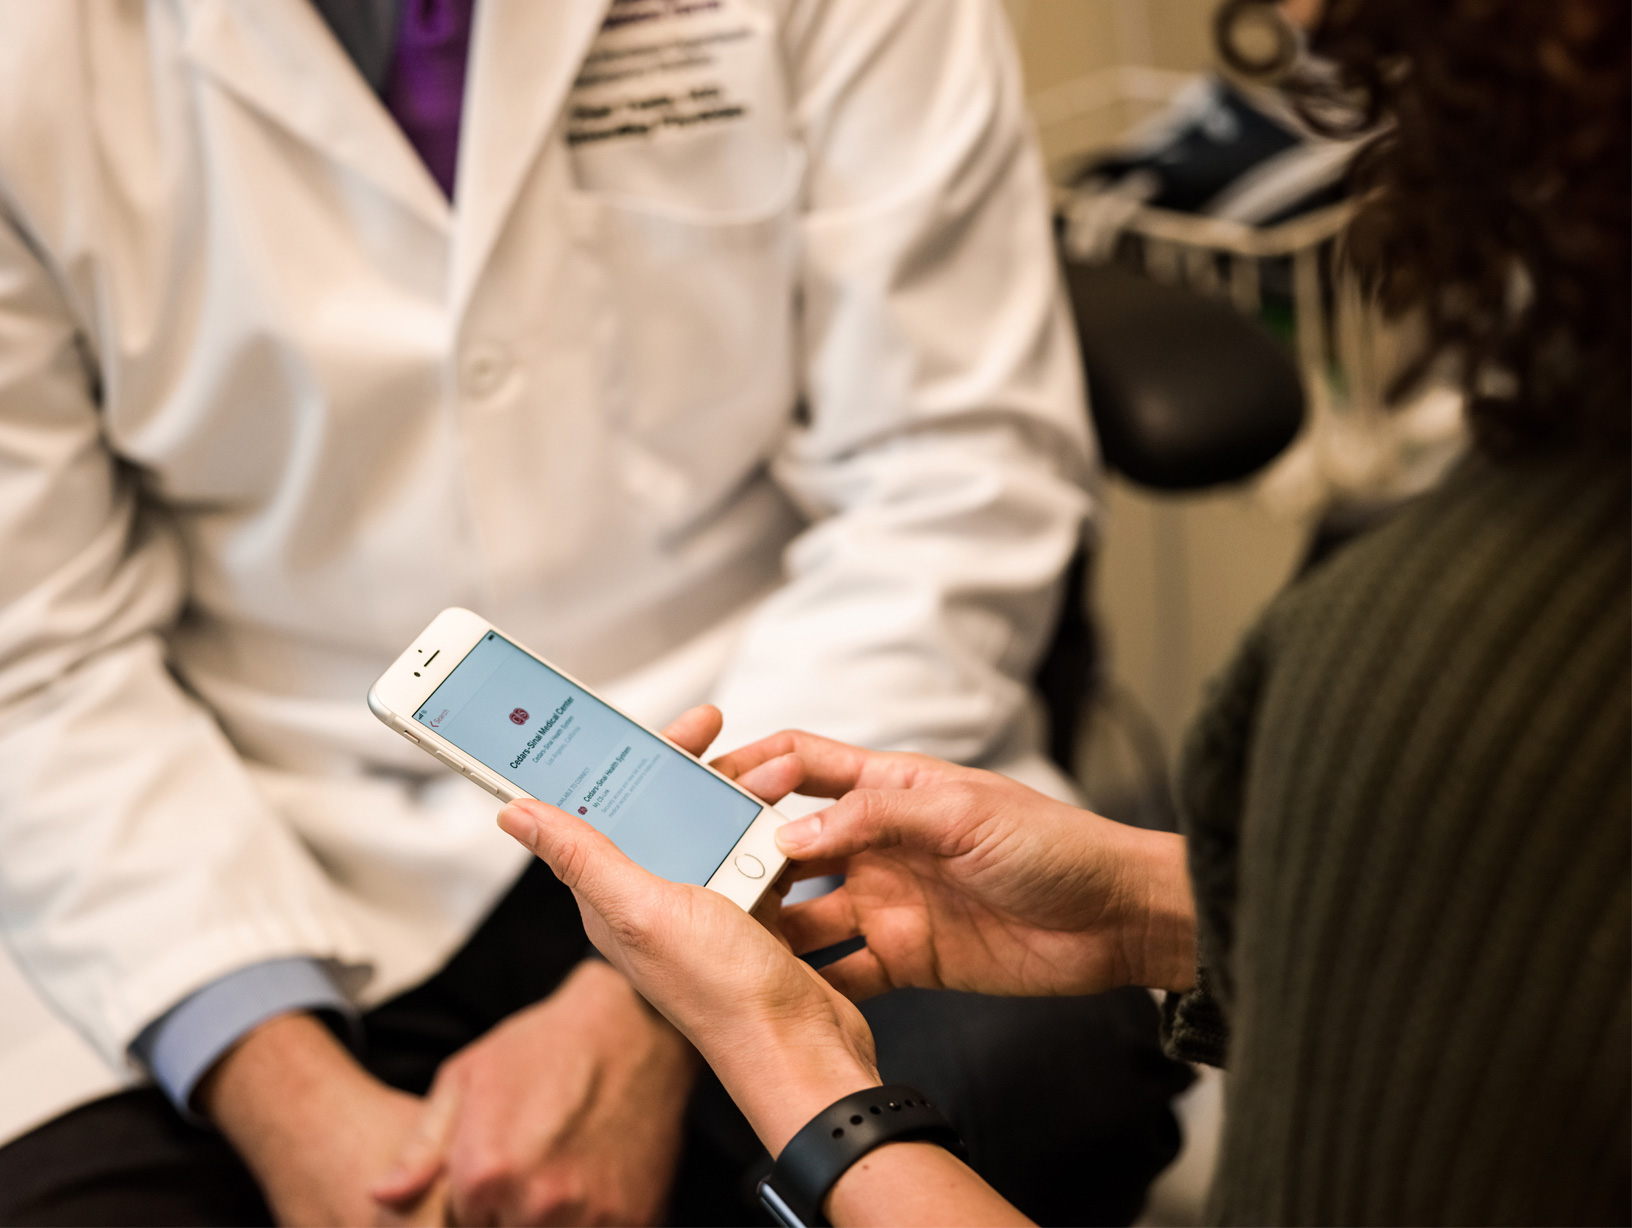 Image of patient showing doctor her health records on phone